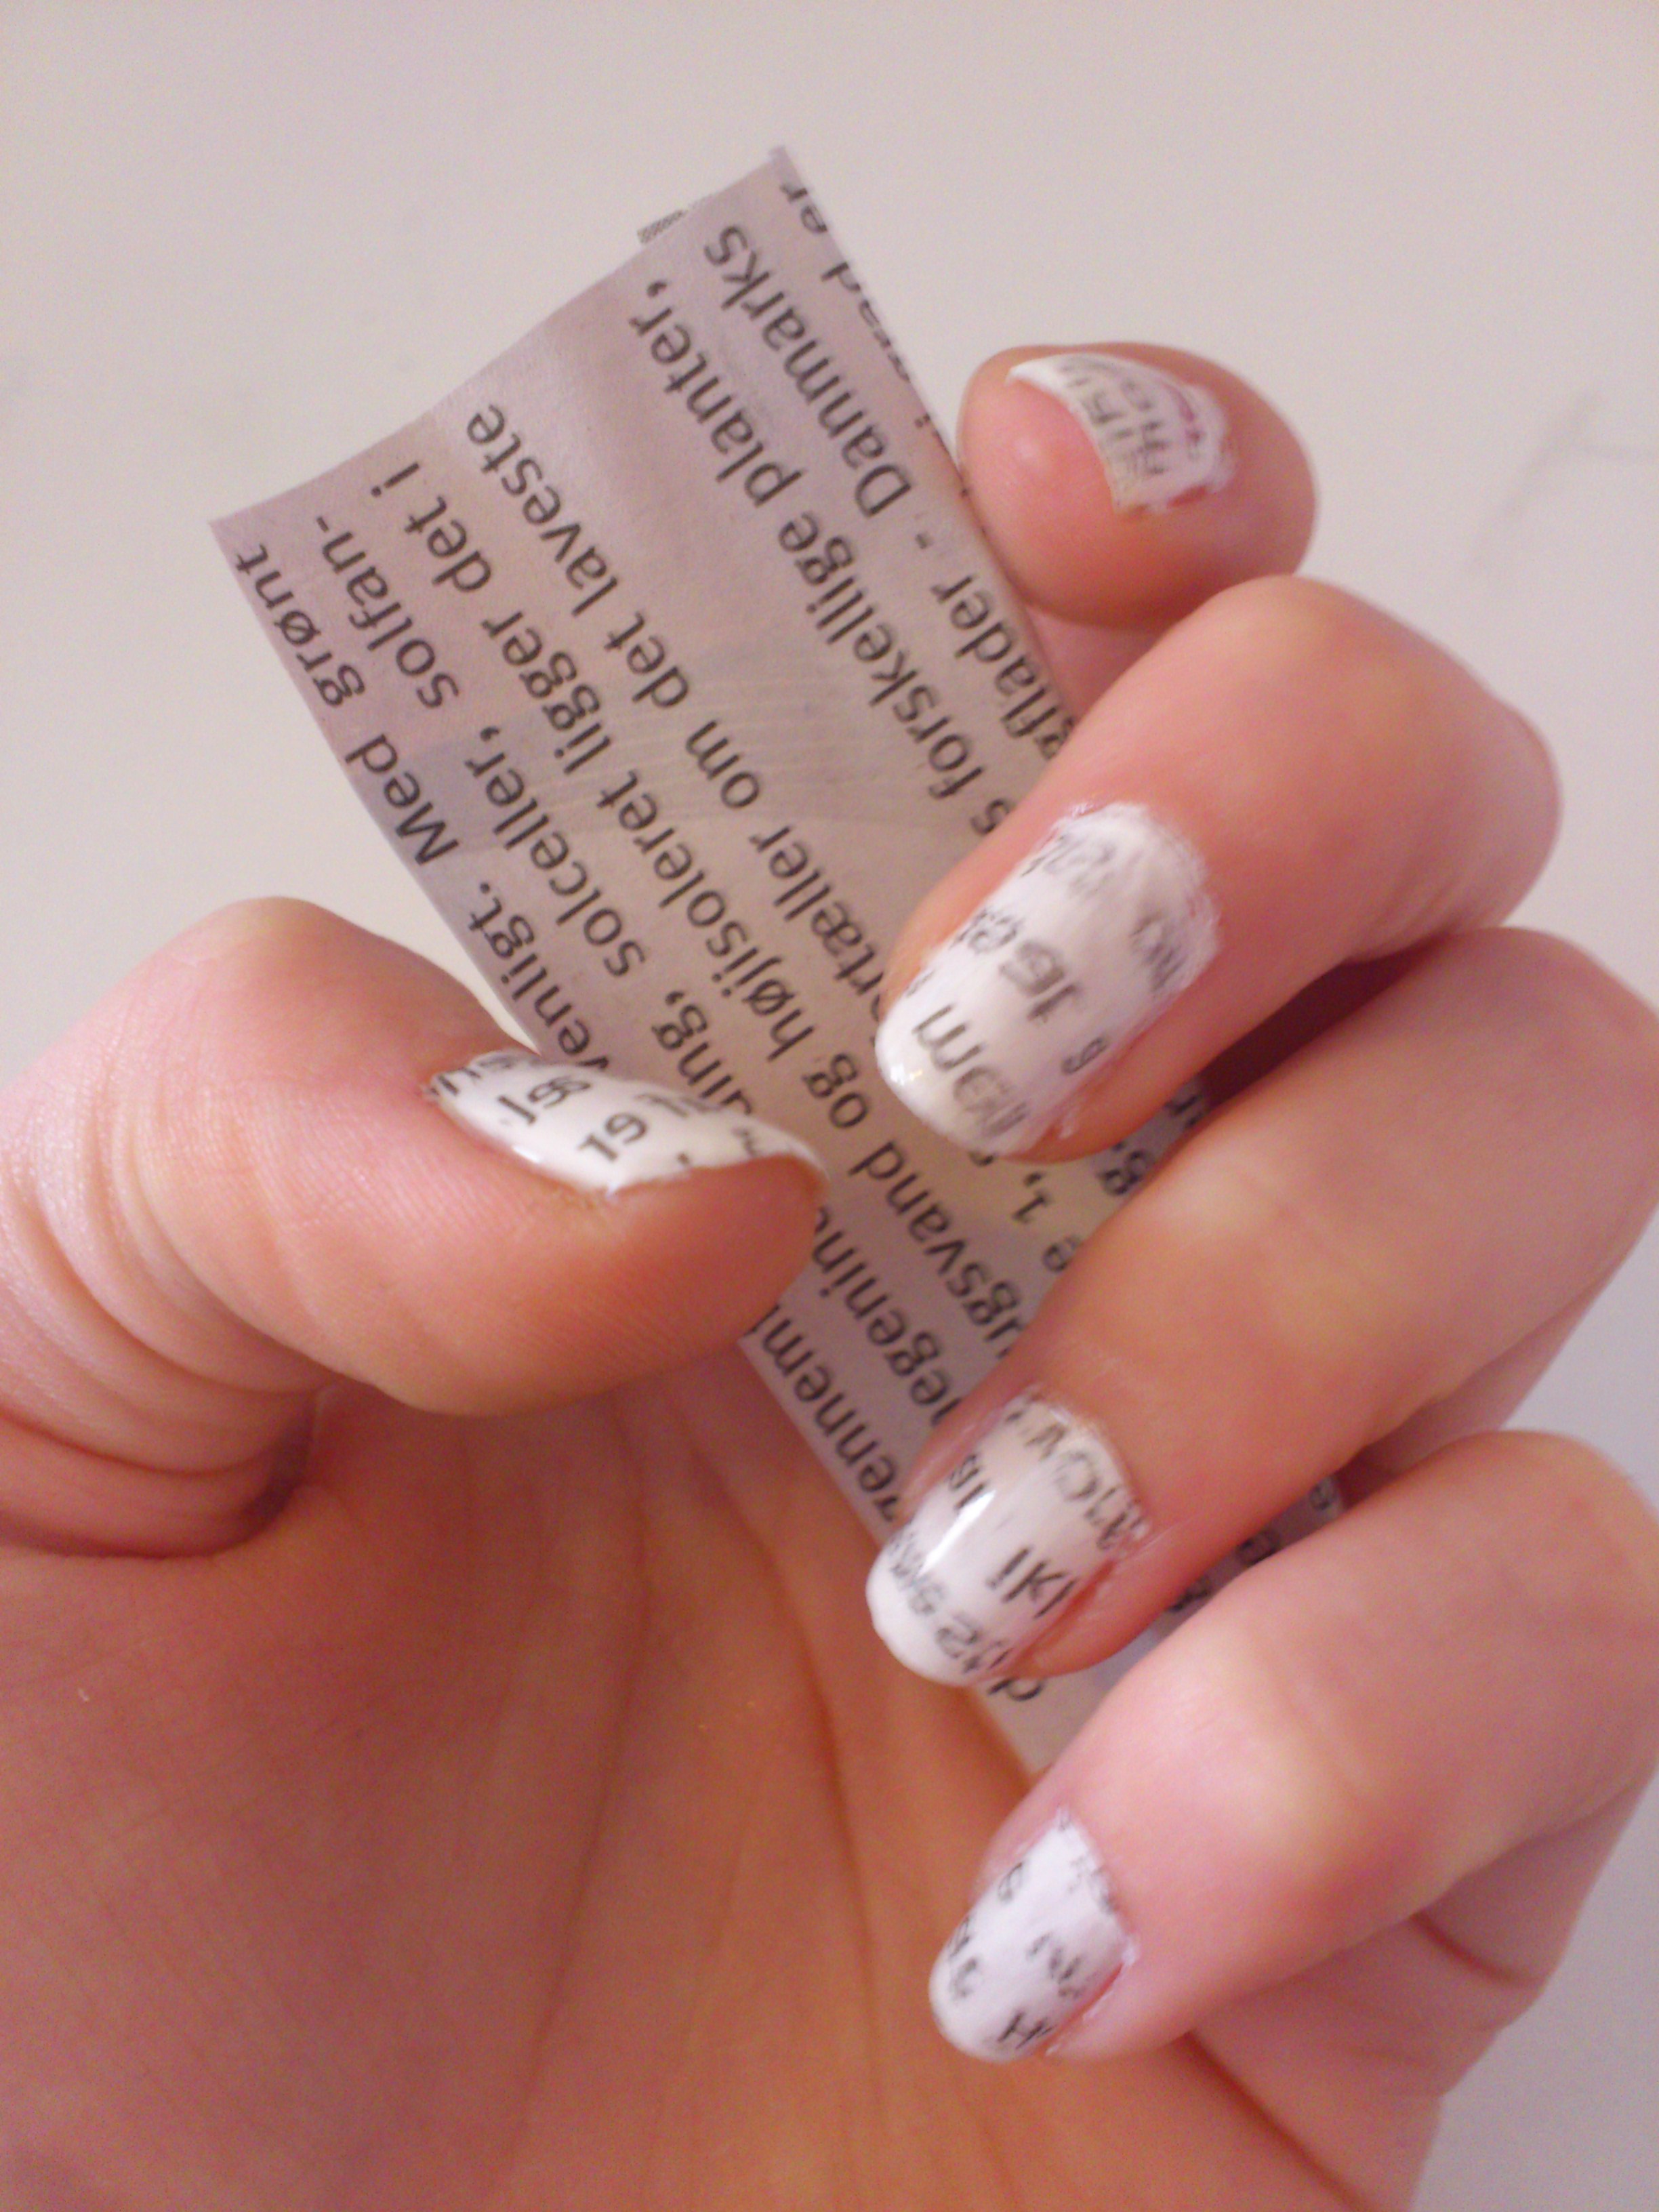 Can You Do Newspaper Nails With Nail Polish Remover